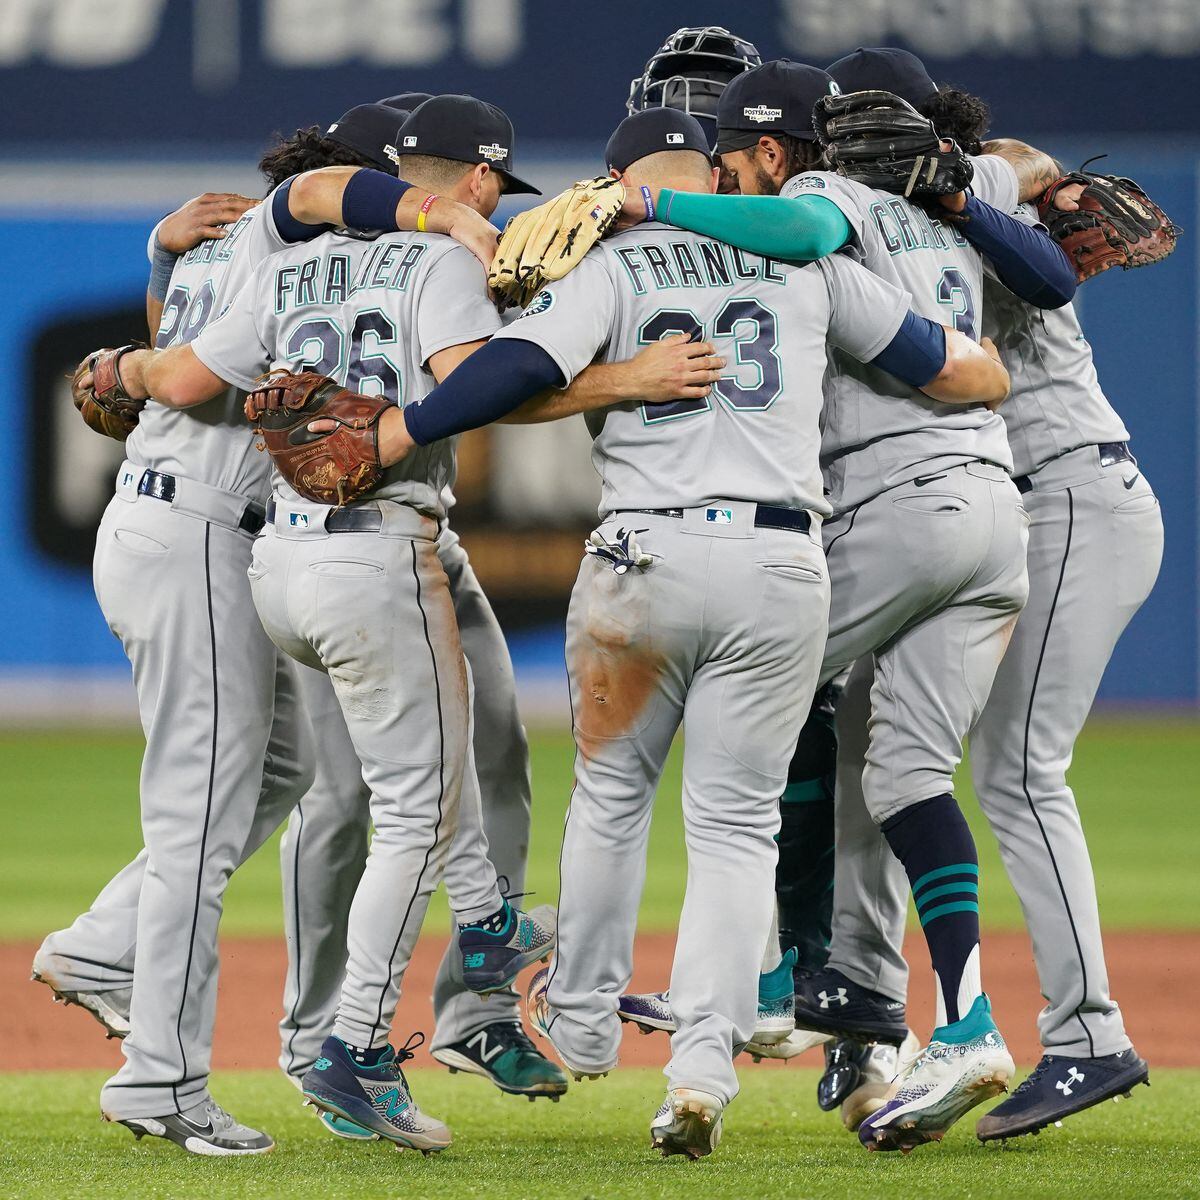 Mariners-Blue Jays AL Wild Card schedule: dates, times, format